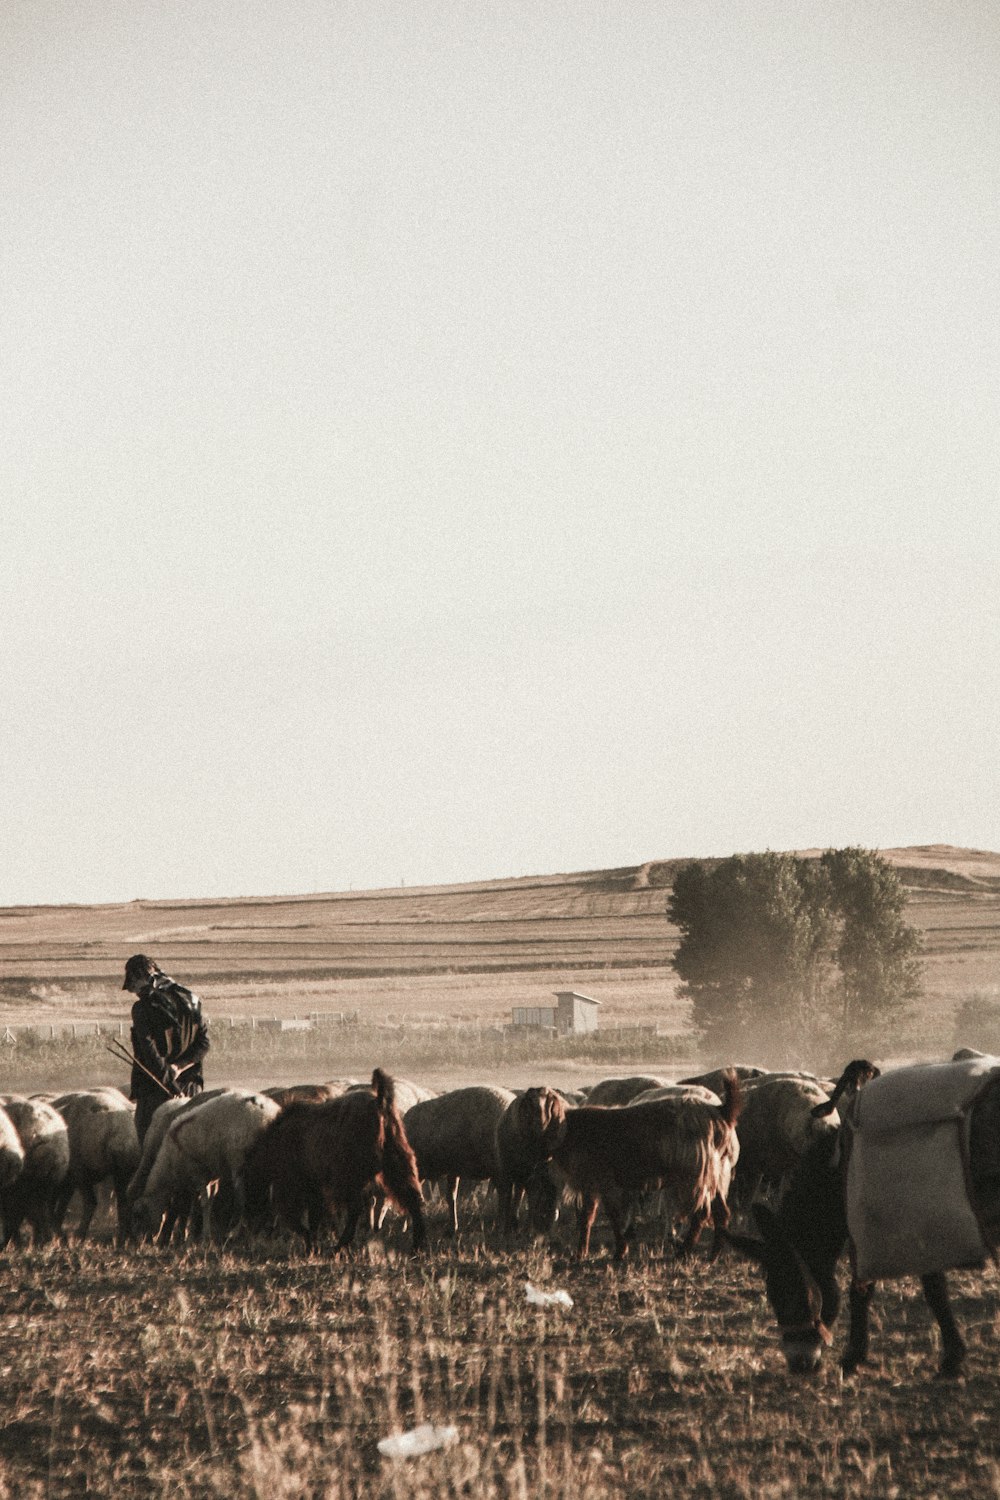 a person herding cattle